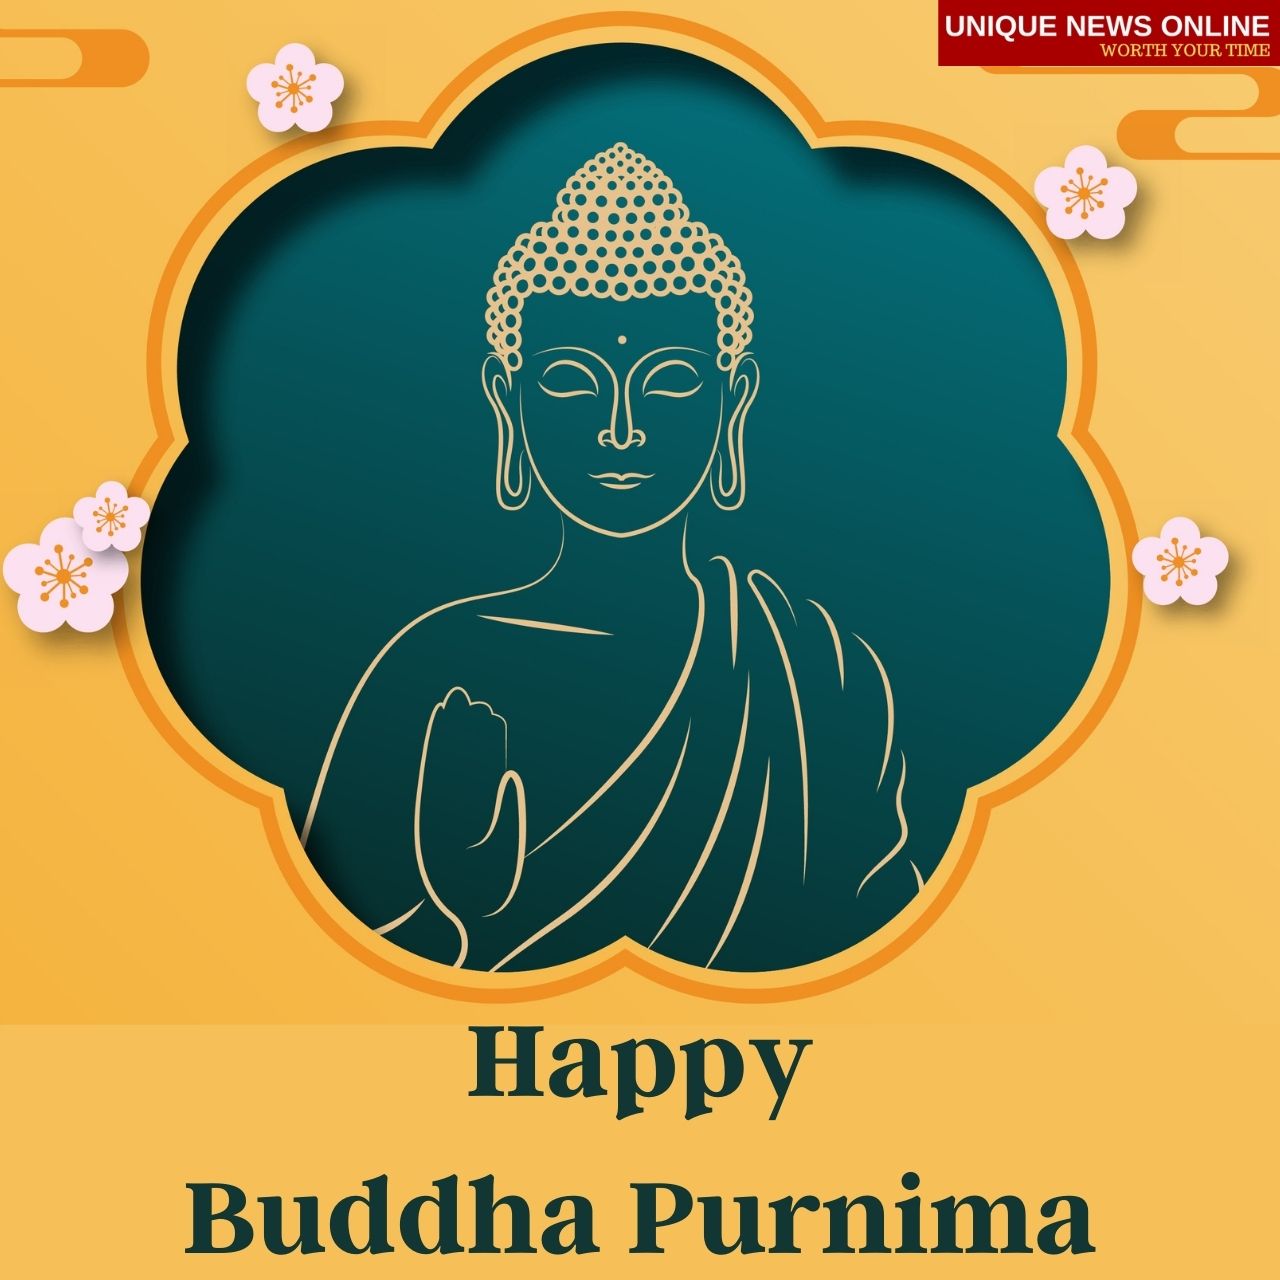 Buddha Purnima 2021: HD Images, Wishes, Wallpaper, Greetings, GIF, Quotes,  Status, and WhatsApp Messages to Share on Vaisakh Purnima